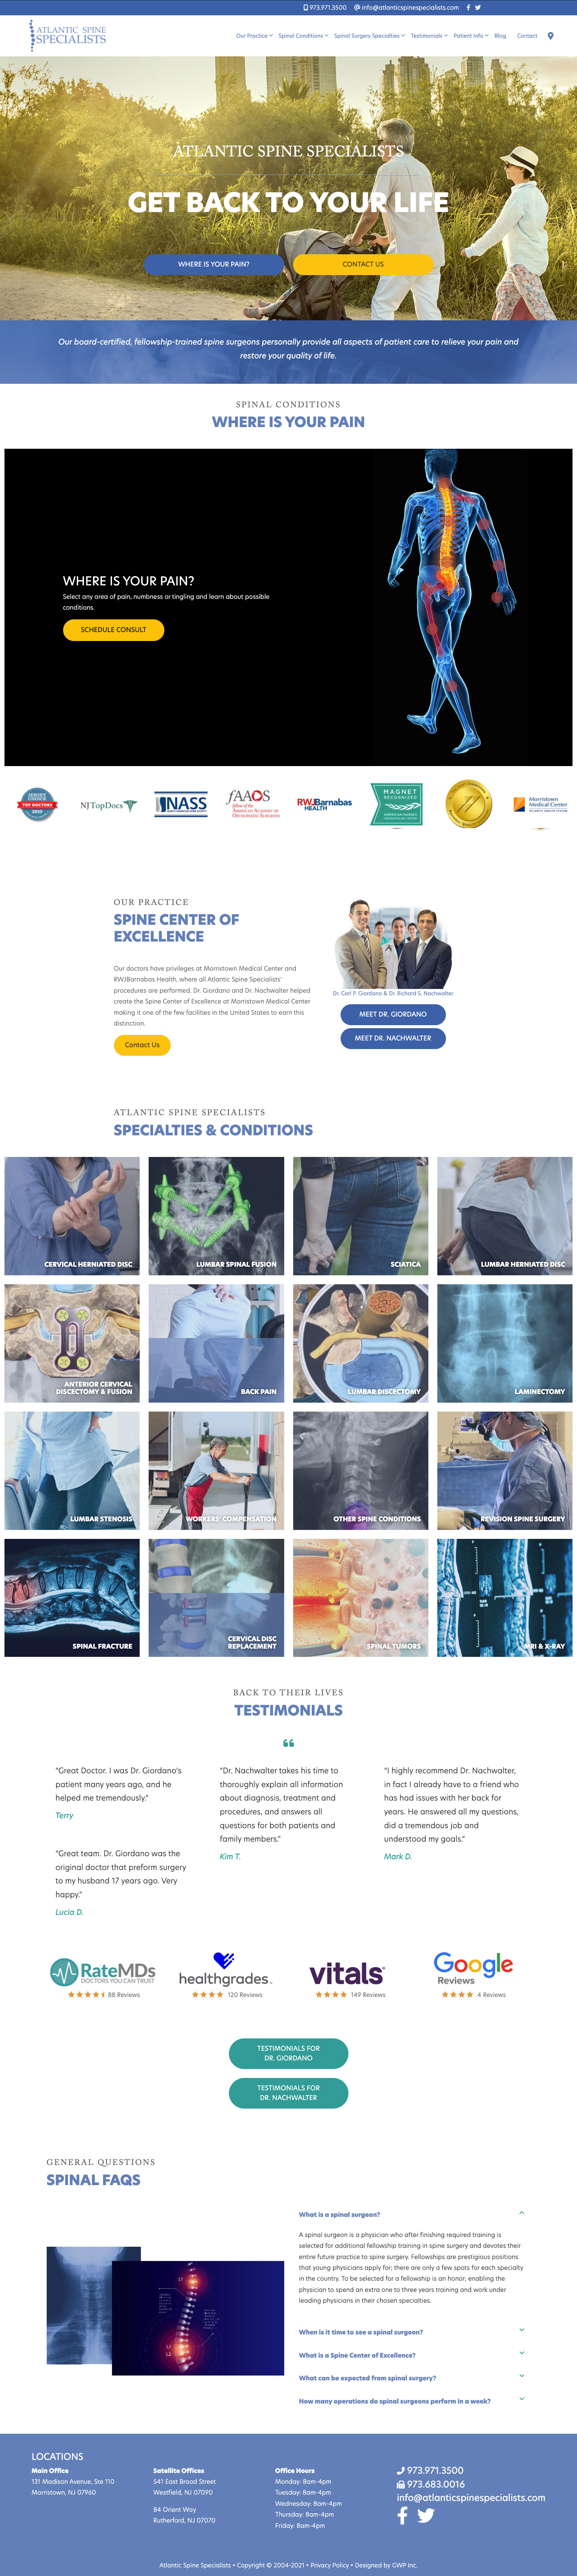 Atlantic Spine Specialists Homepage Thumbnail Image